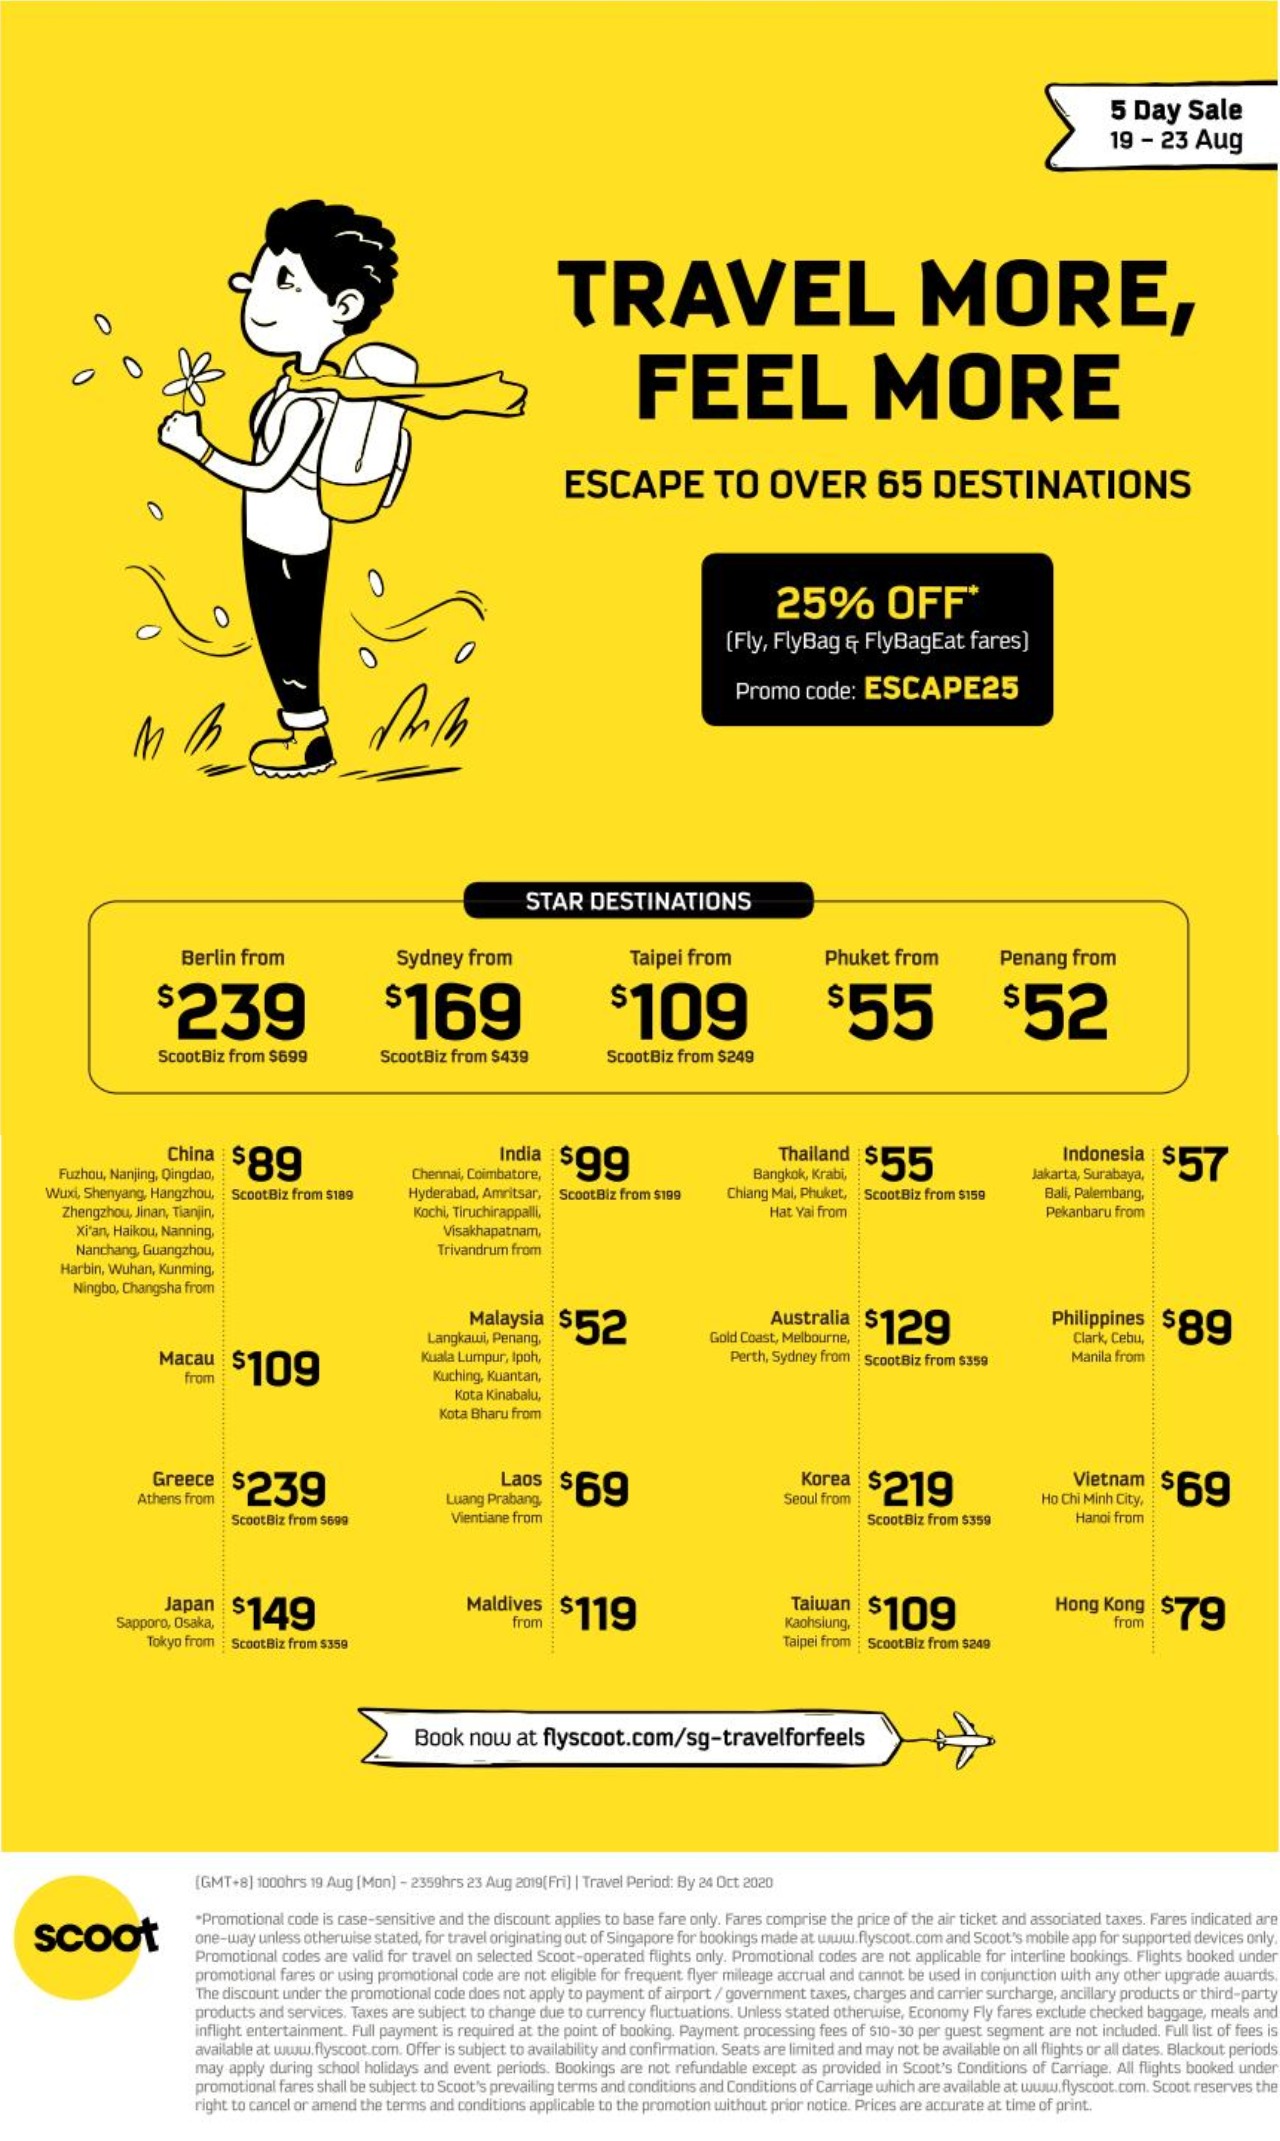 Scoot runs 5day sale offering promo fares to Thailand, Japan, Korea